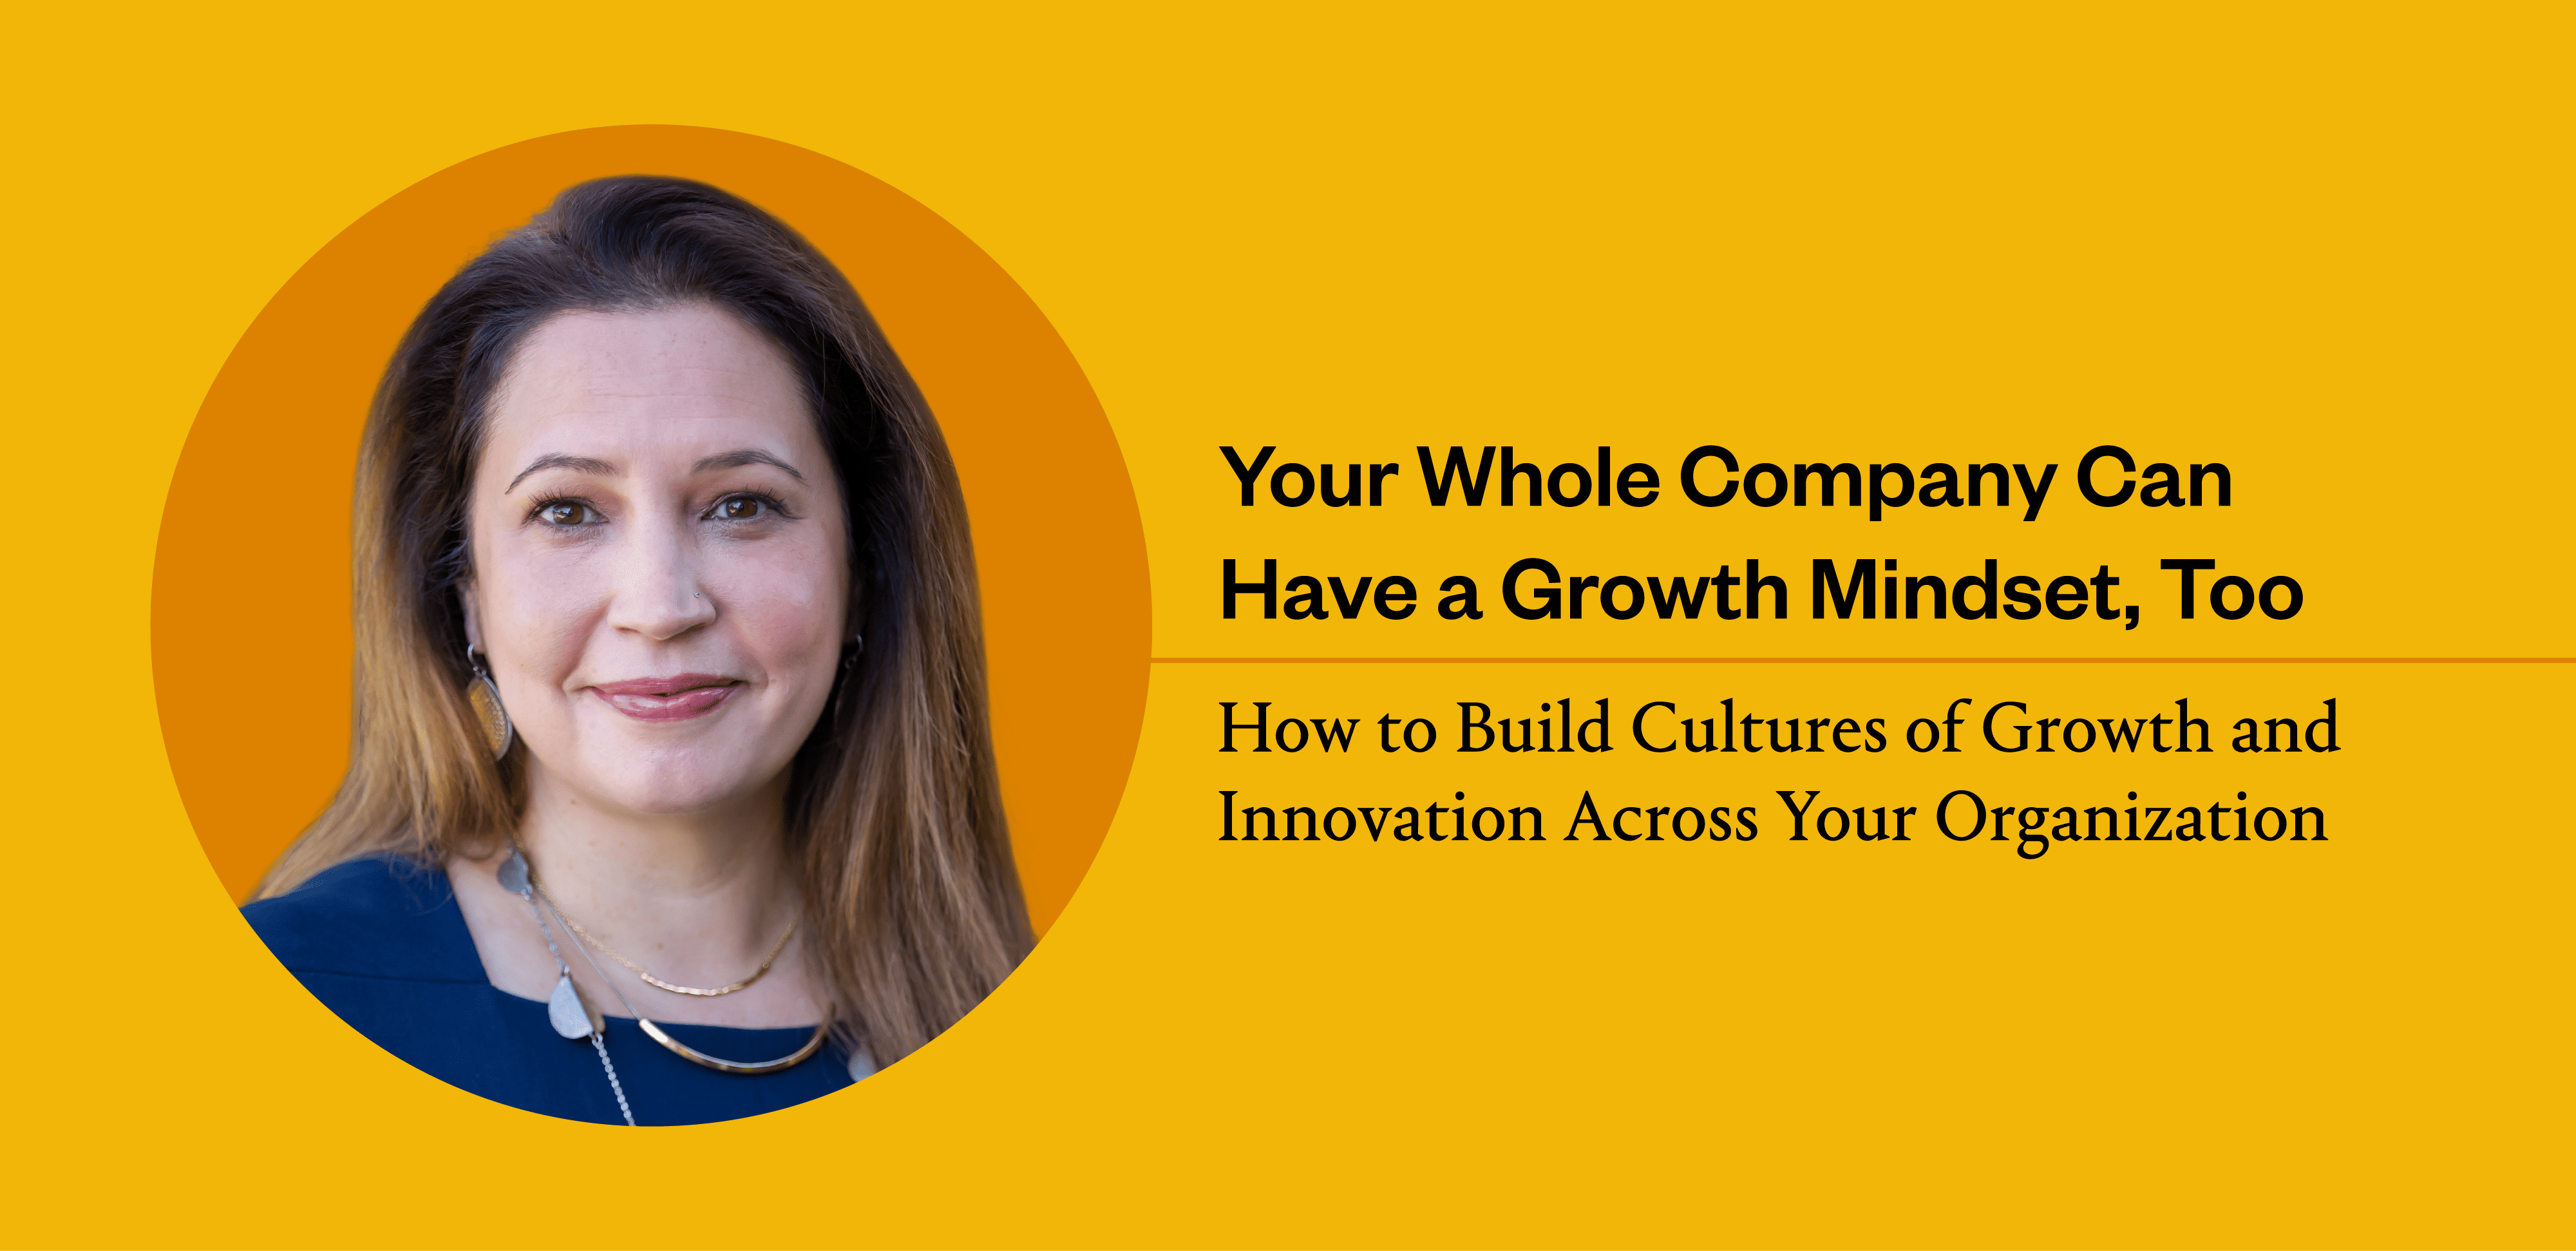 You Can Build a Growth Mindset For Your Entire Organization. Psychologist Mary C. Murphy Shows You How